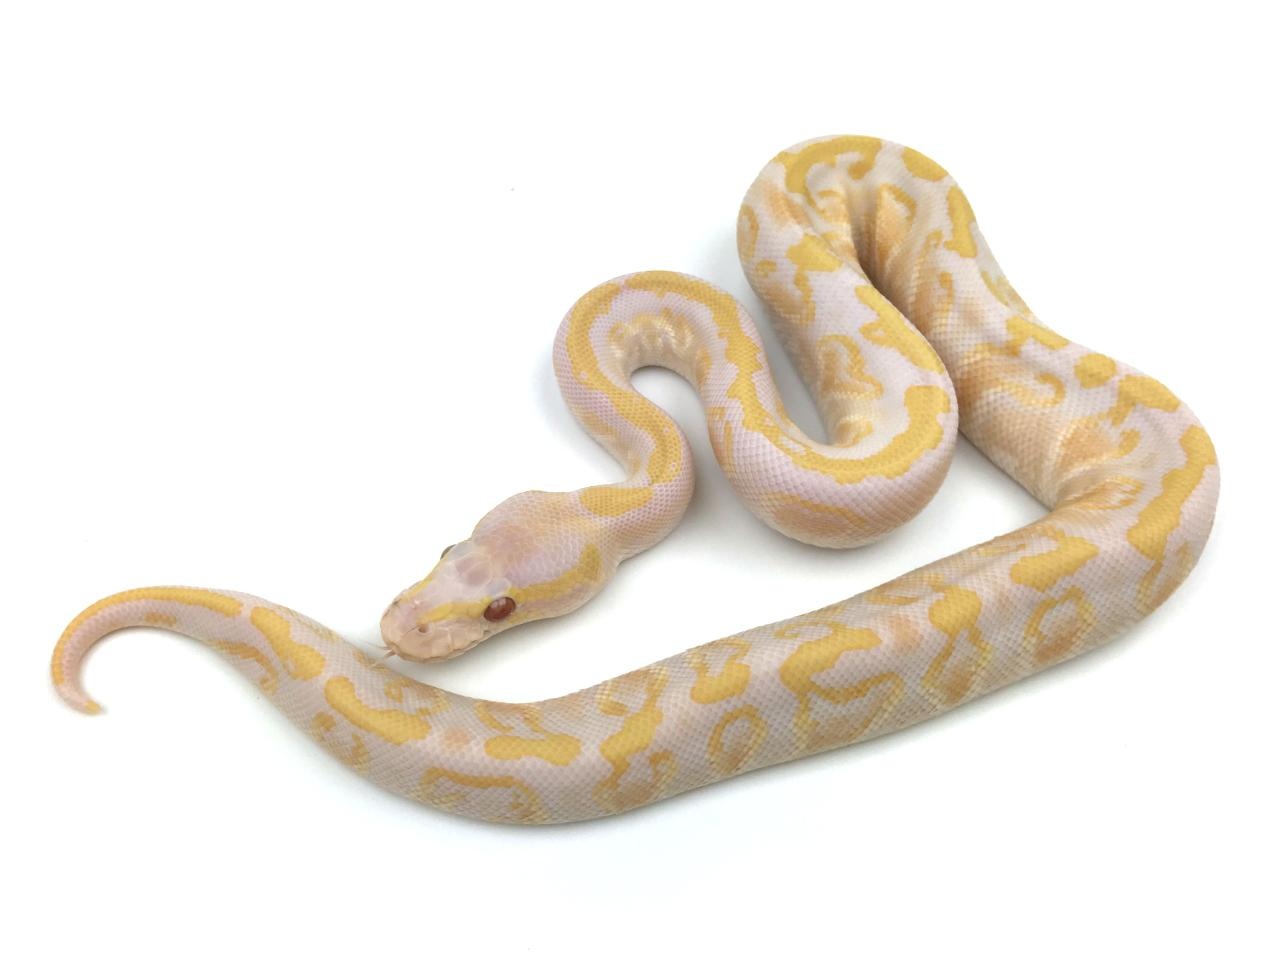 GHI Mystic Lavender Albino Ball Python by Royal Constrictor Designs